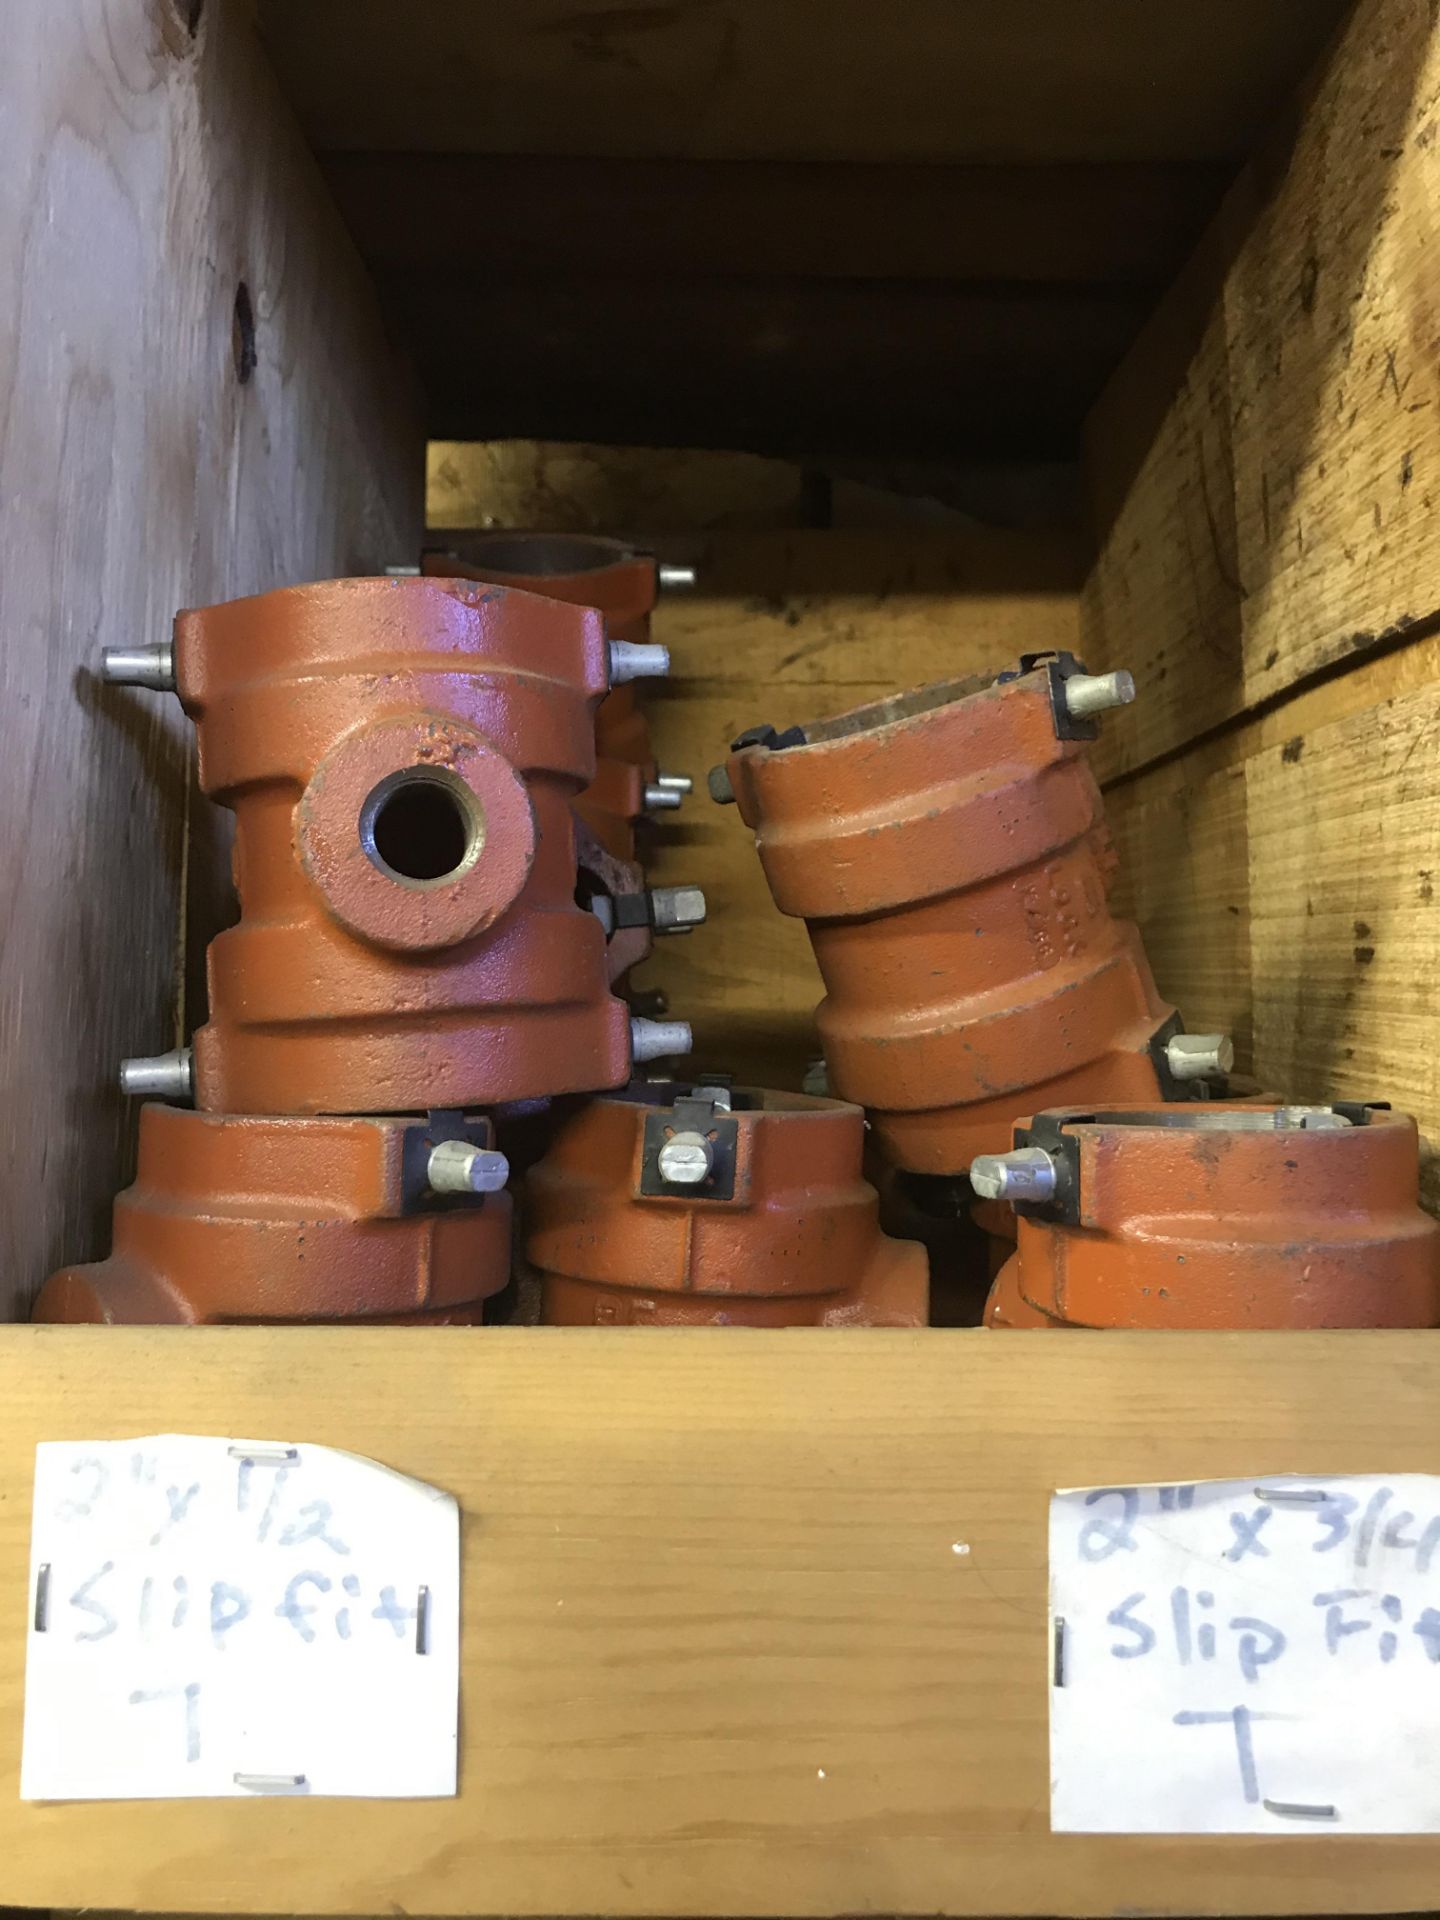 {LOT} Lg. Qty of Victaulic Valves, Couplings, Reducing T's, Clamps, Cross Tee's, Caps, Drains, - Image 9 of 9